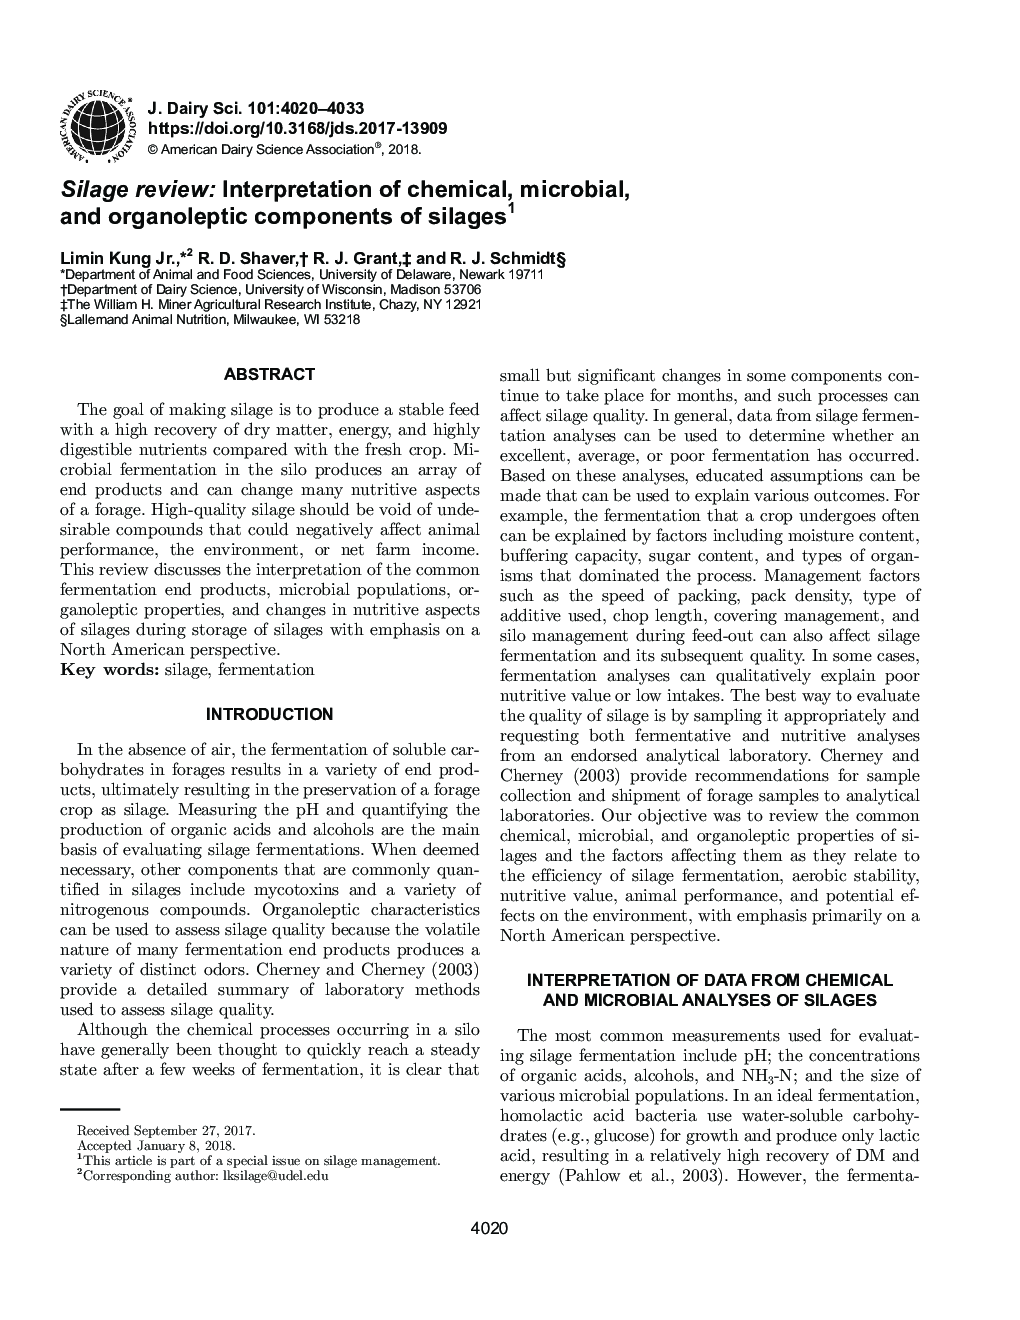 Silage review: Interpretation of chemical, microbial, and organoleptic components of silages